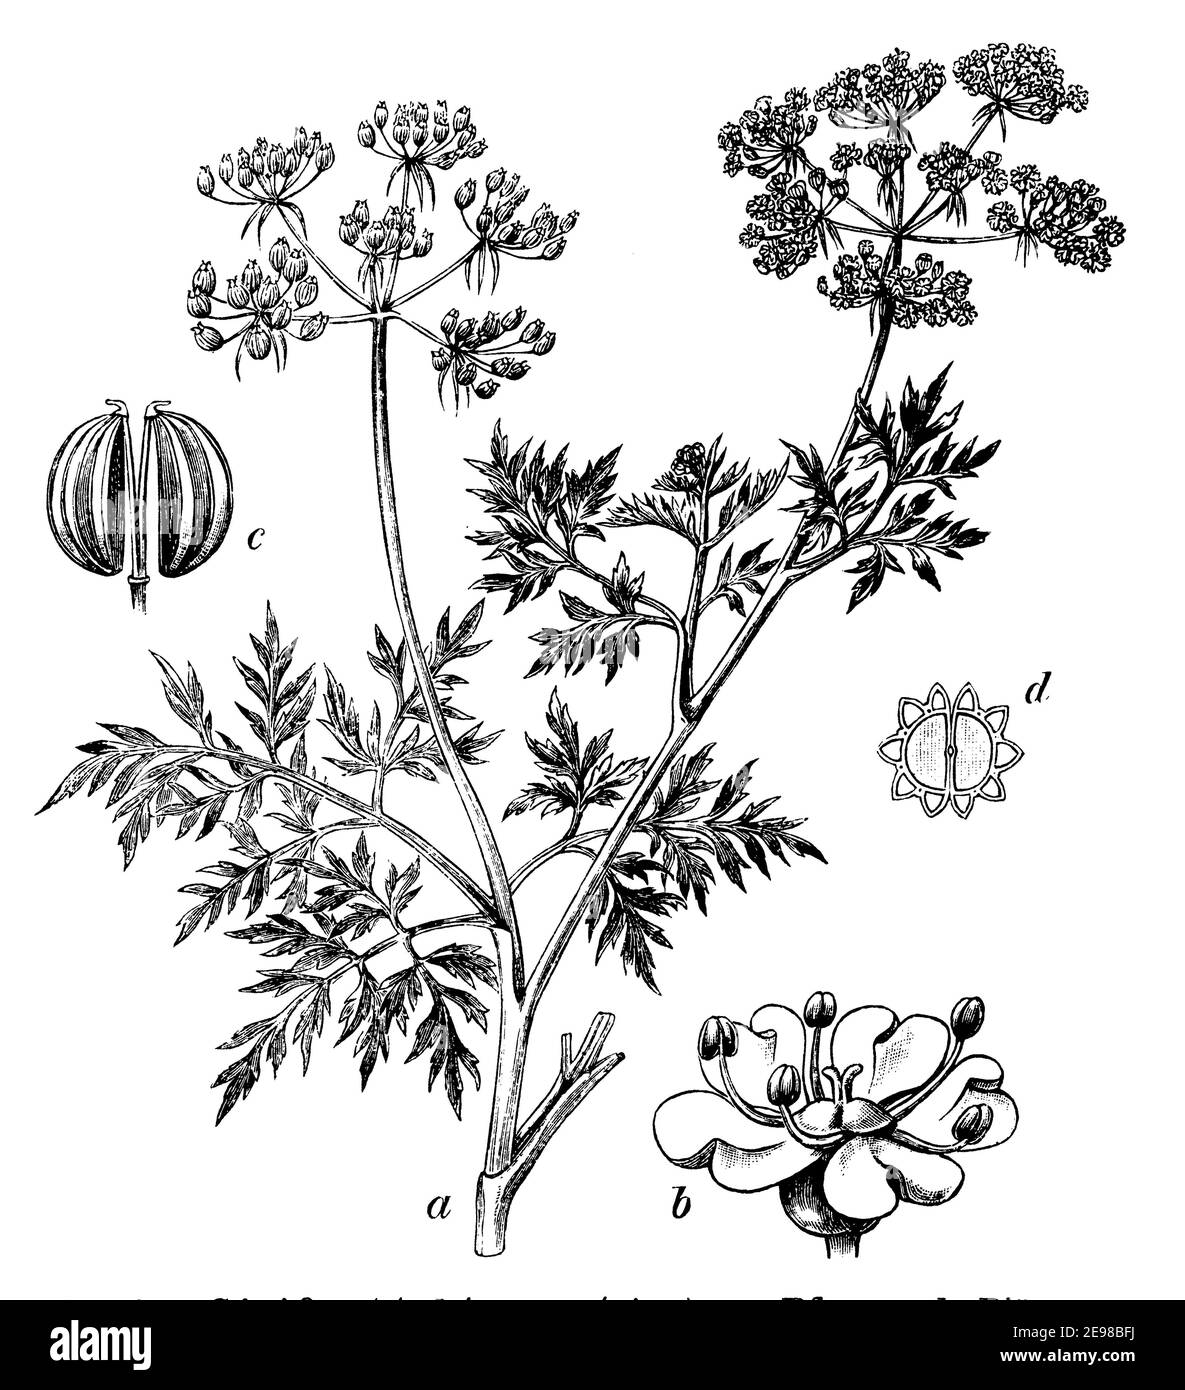 Narr's Petersilie, Narr's cicely, or poison Petersilie / Aethusa cynapium / Hundspetersilie (Botanik Buch, 1902) Stockfoto